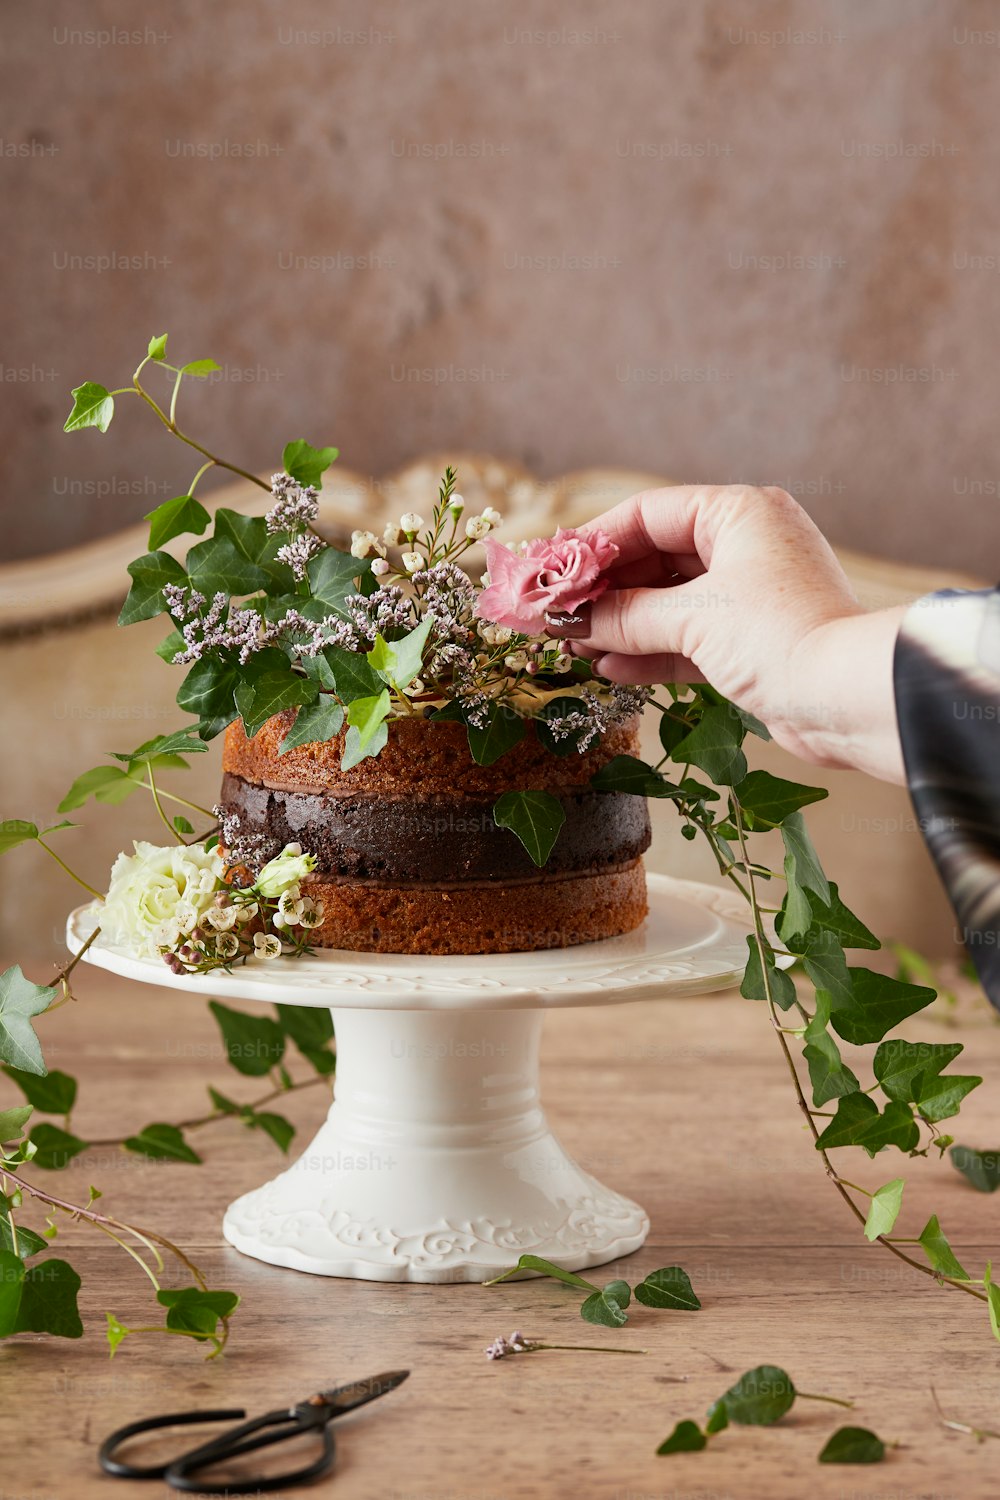 a person is decorating a cake with flowers and greenery